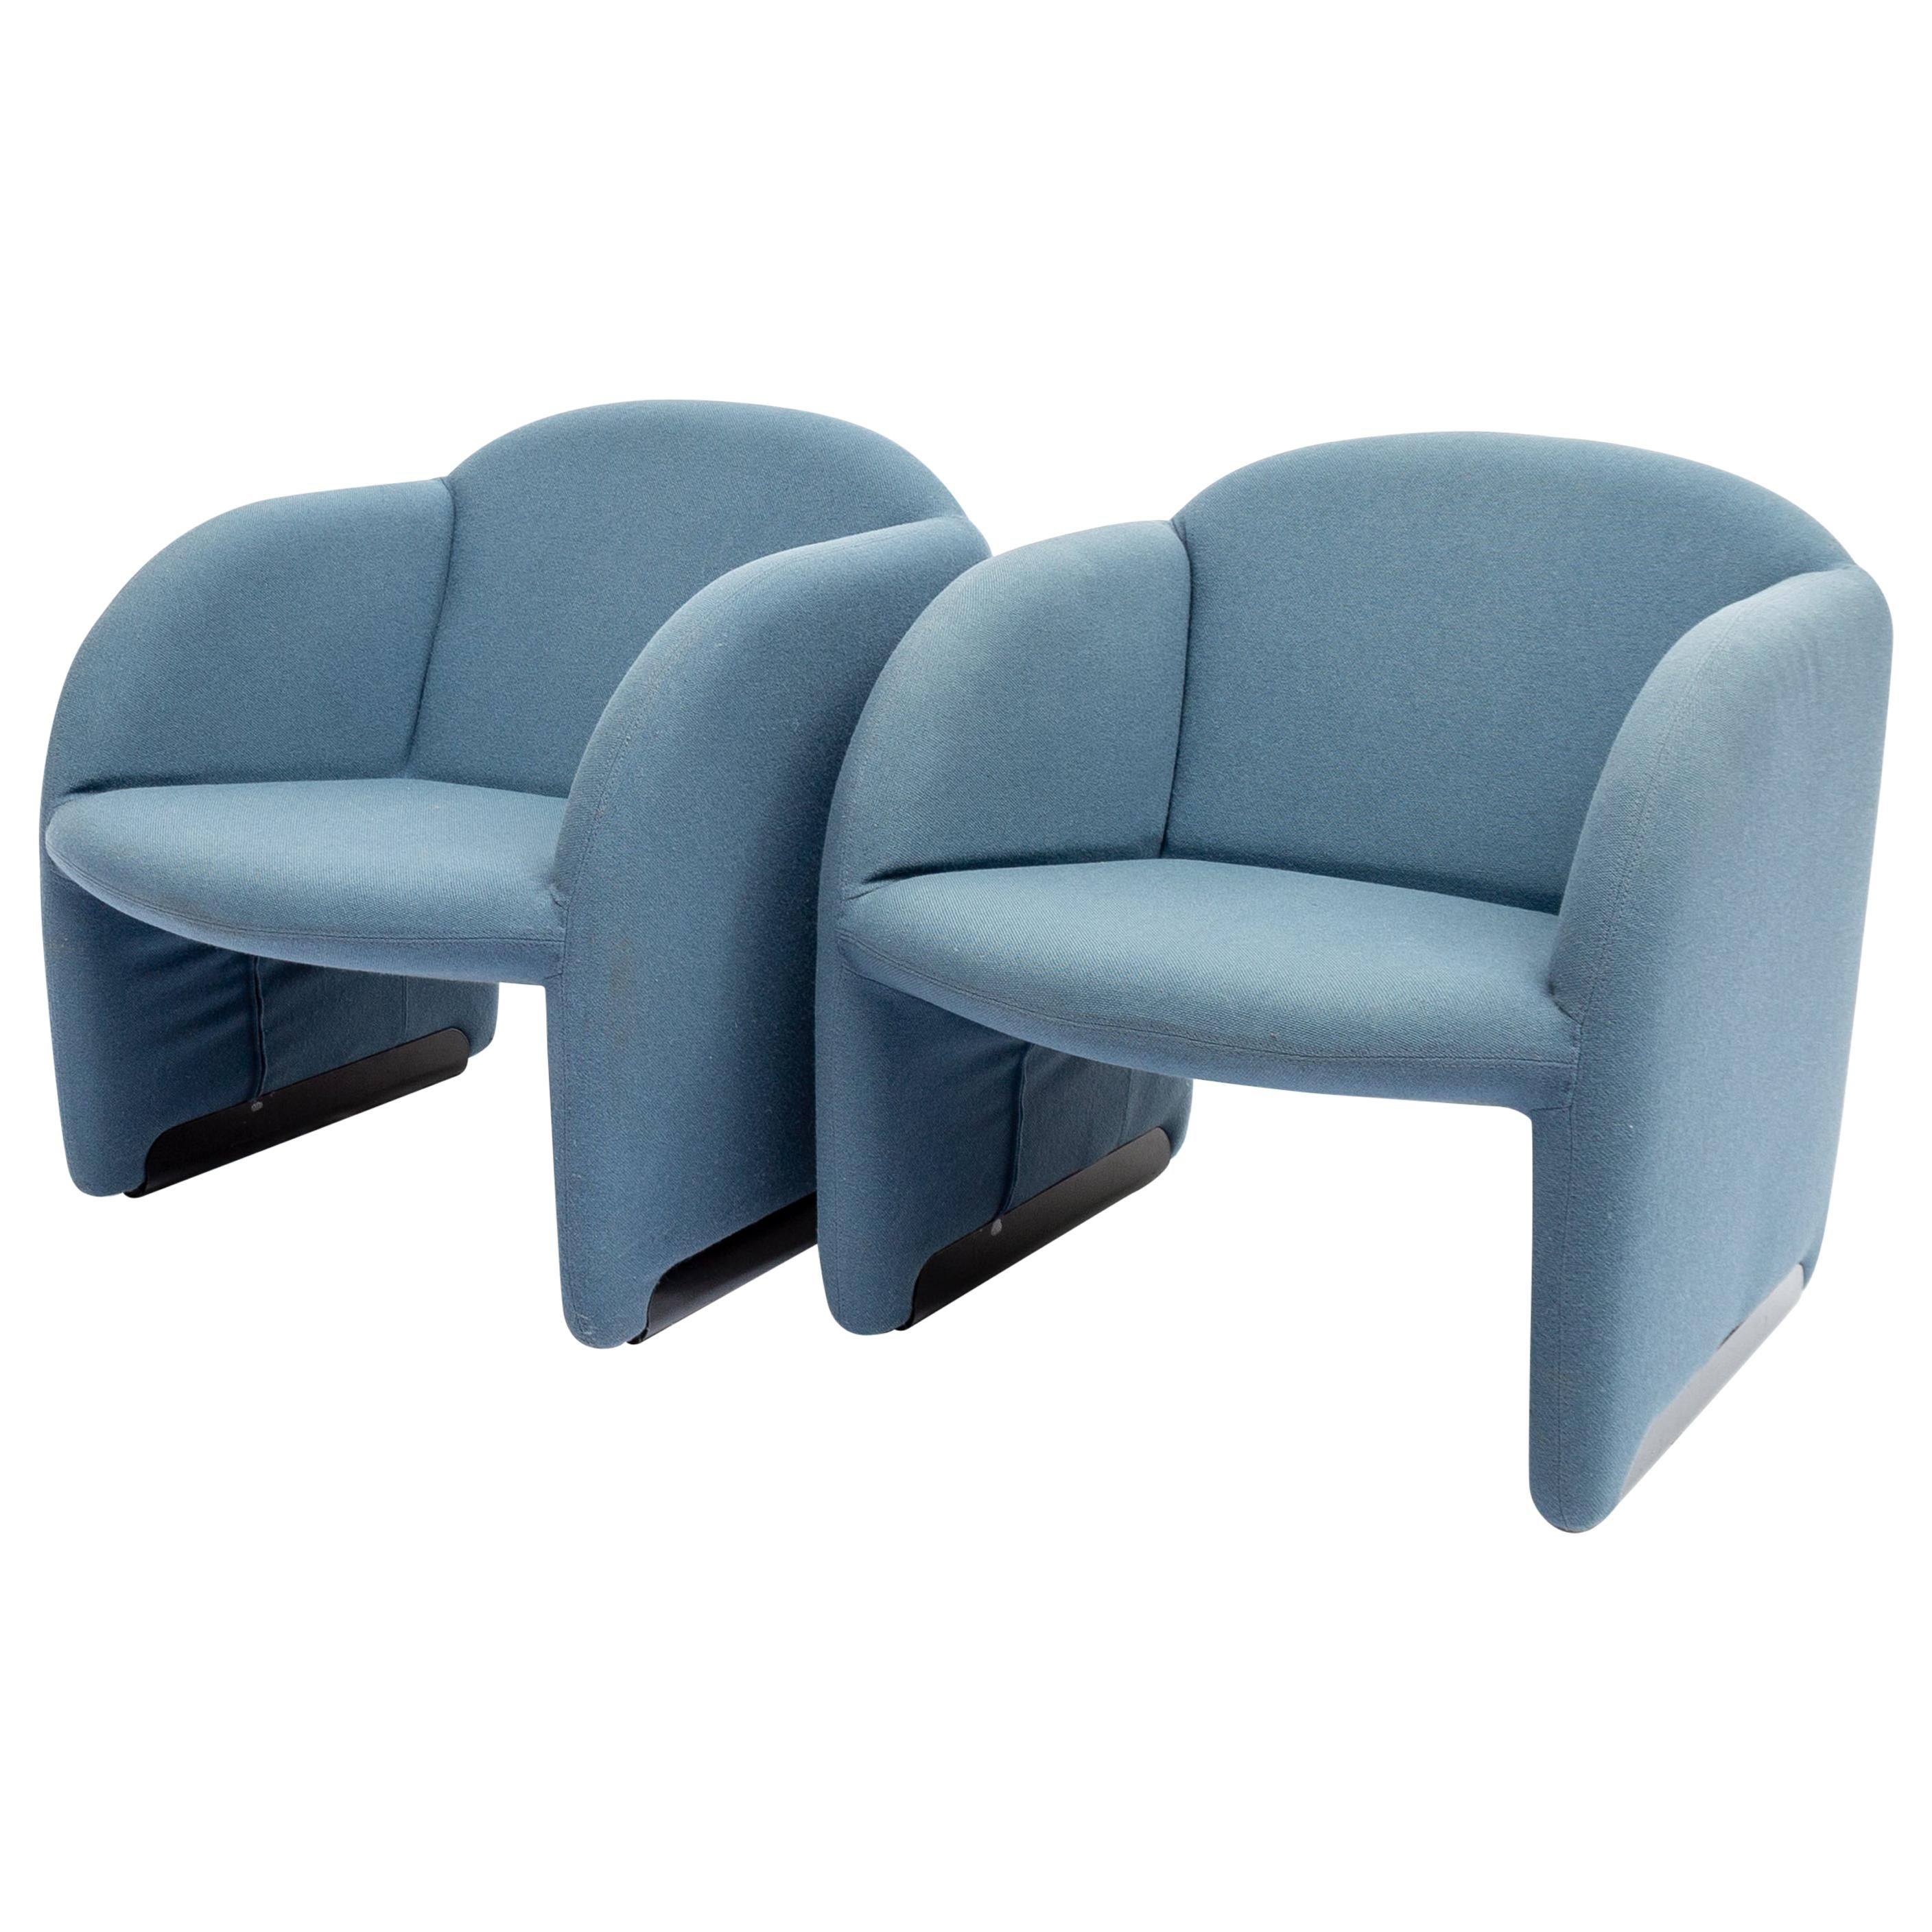 Set of 2 ‘Ben’ Chairs by Pierre Paulin for Artifort, 1970s